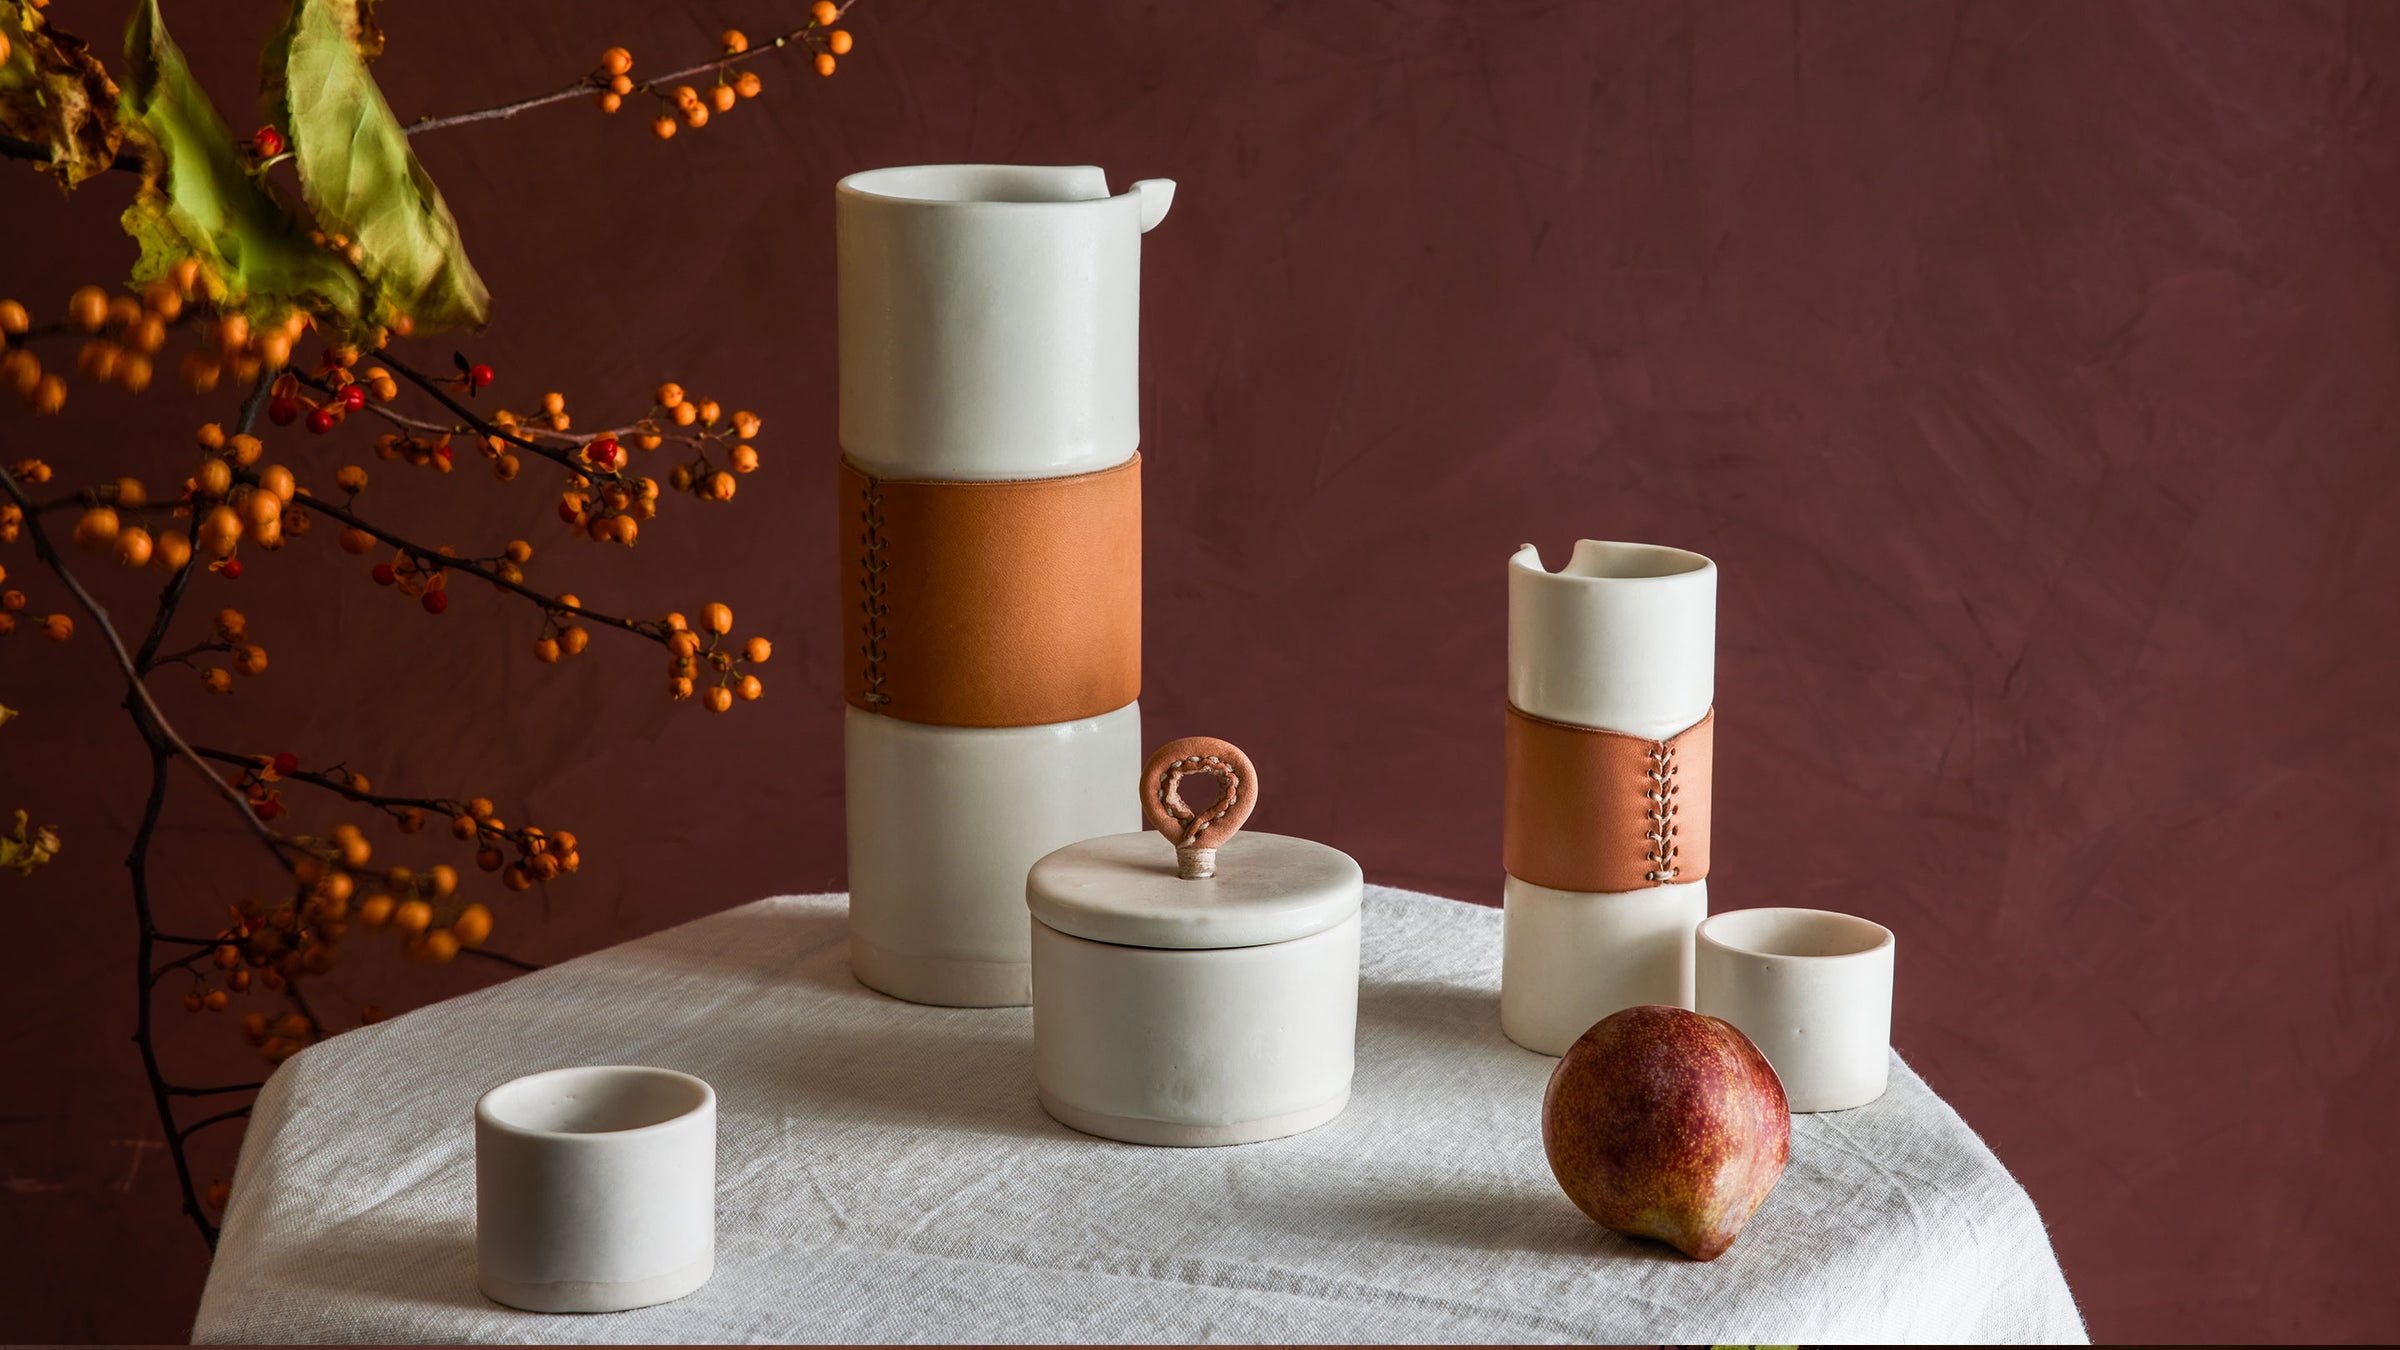 dbo home luxury handmade white porcelain and leather pitchers, salt cellar, and sake cups on linen table cloth with winter berries and fruit